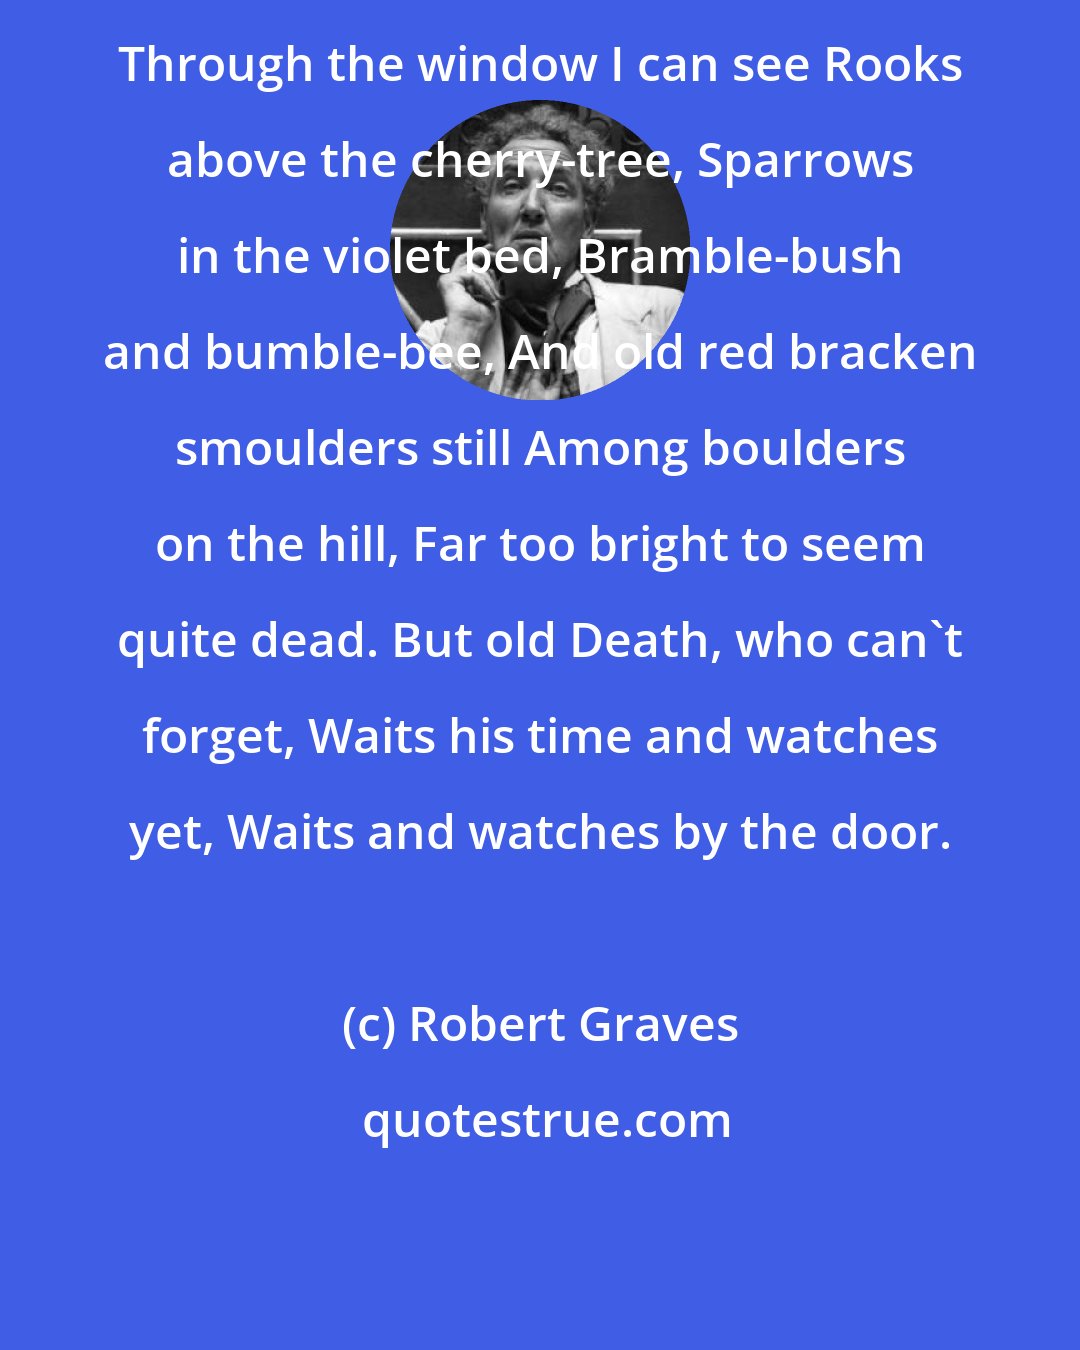 Robert Graves: Through the window I can see Rooks above the cherry-tree, Sparrows in the violet bed, Bramble-bush and bumble-bee, And old red bracken smoulders still Among boulders on the hill, Far too bright to seem quite dead. But old Death, who can't forget, Waits his time and watches yet, Waits and watches by the door.